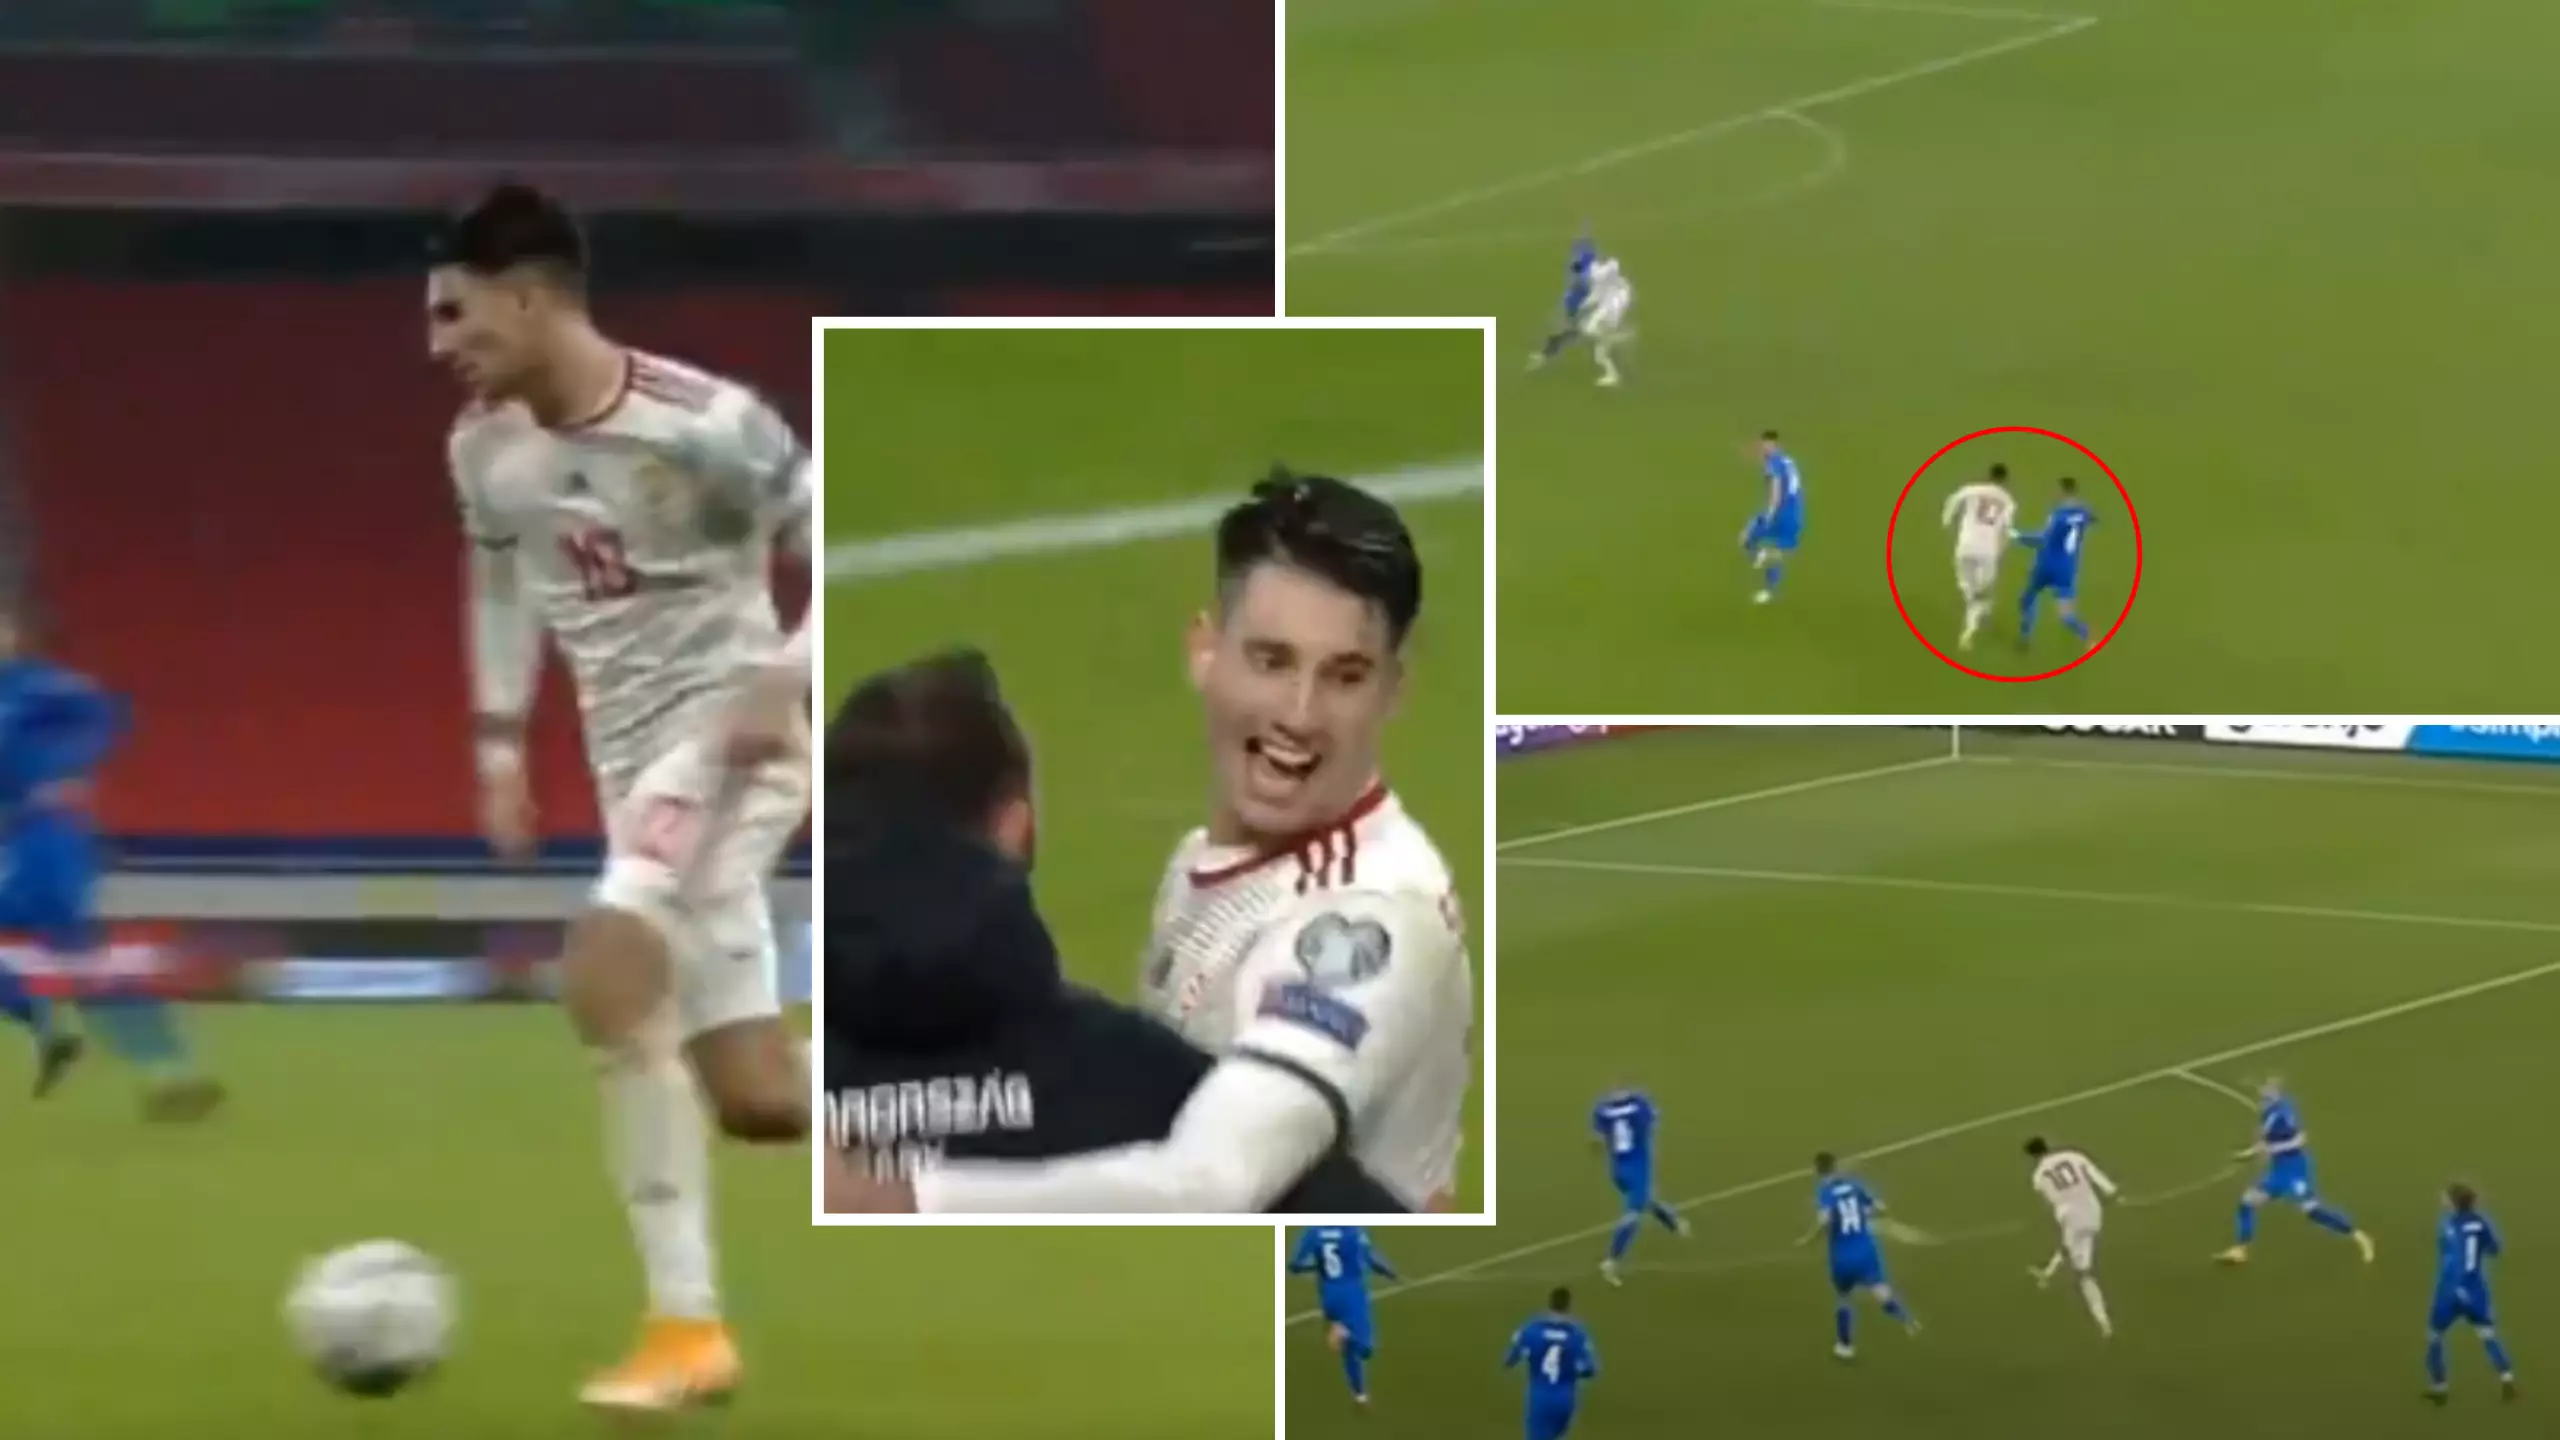 20-Year-Old Dominik Szoboszlai Produces Incredible Last Minute Solo Goal To Send Hungary To Euro 2020